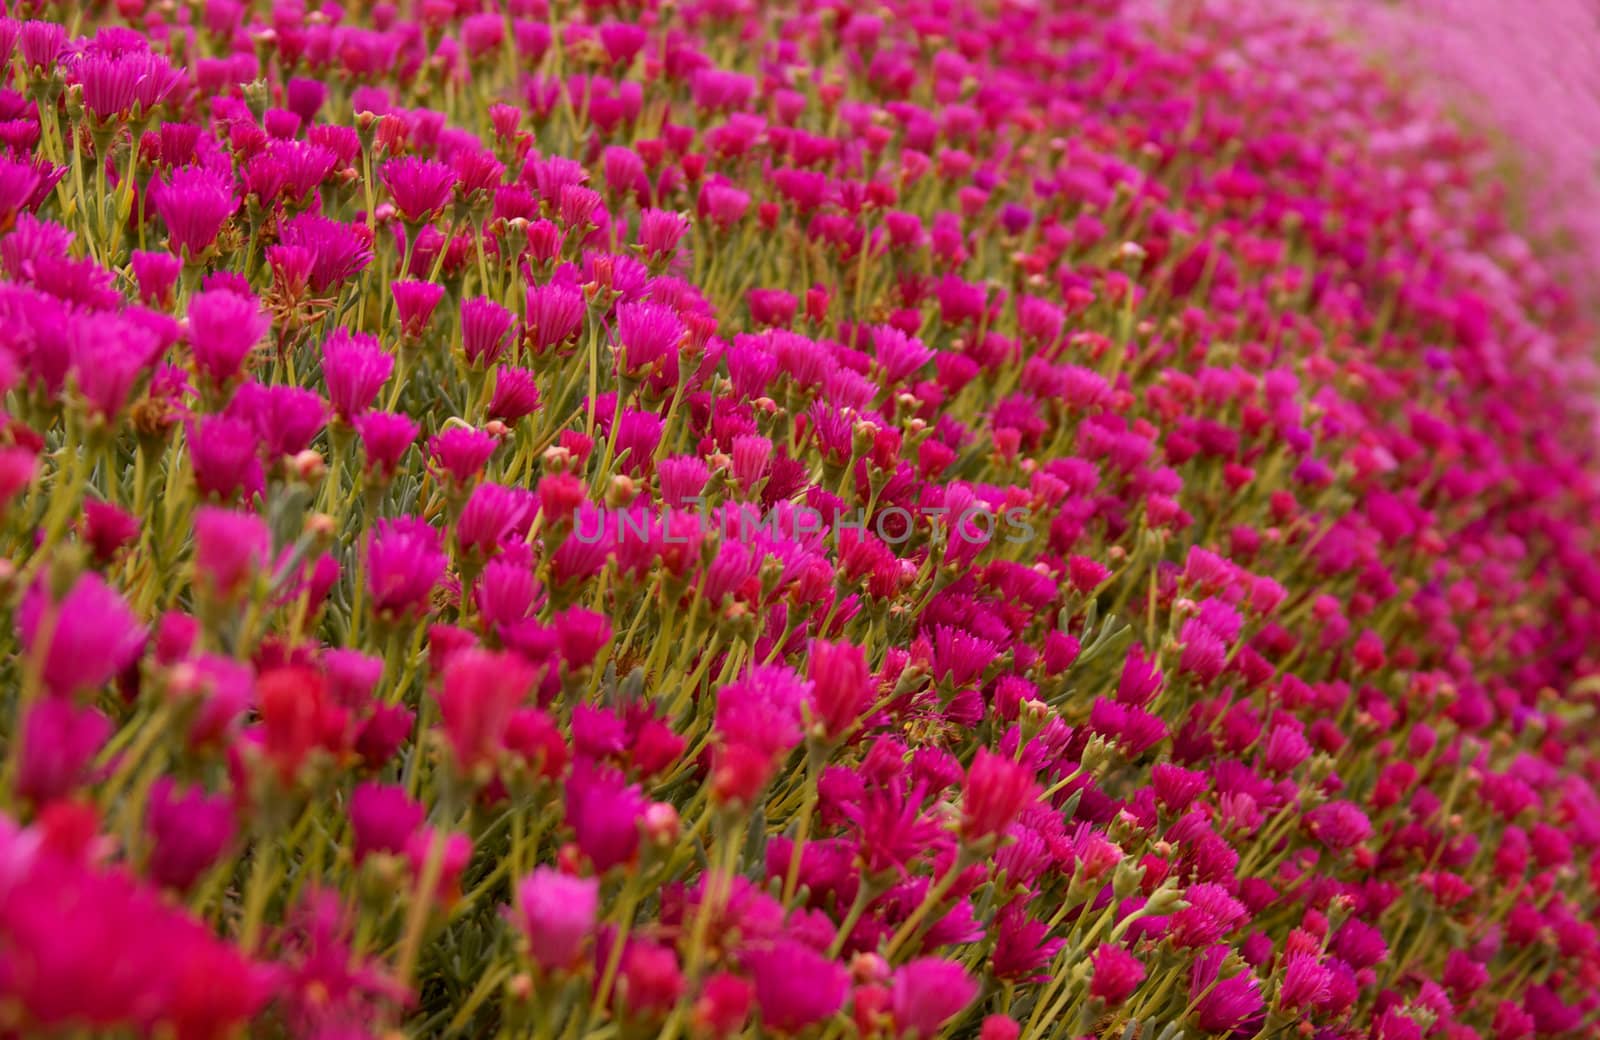 Bed of crowed pink and red flowers with green stems and leaves with narrow depth of field that stretch forever